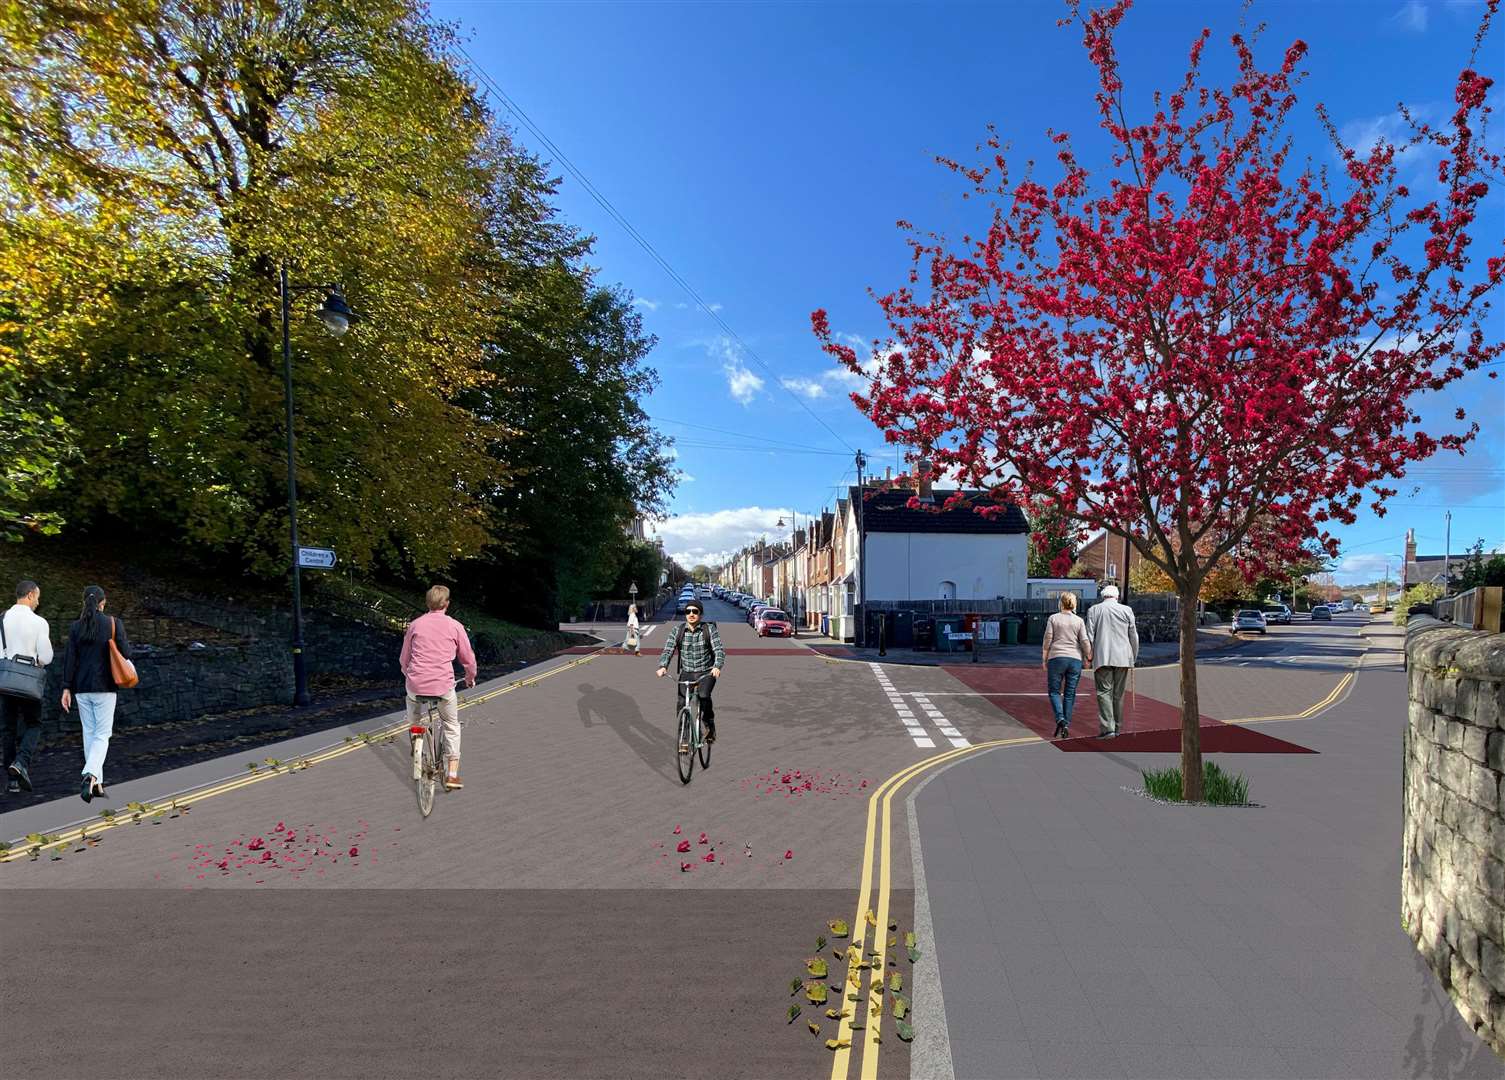 The £1m Active Travel project aims to make cycling and walking around the town safer and more accessible. Picture: Faversham Town Council/Space Syntax